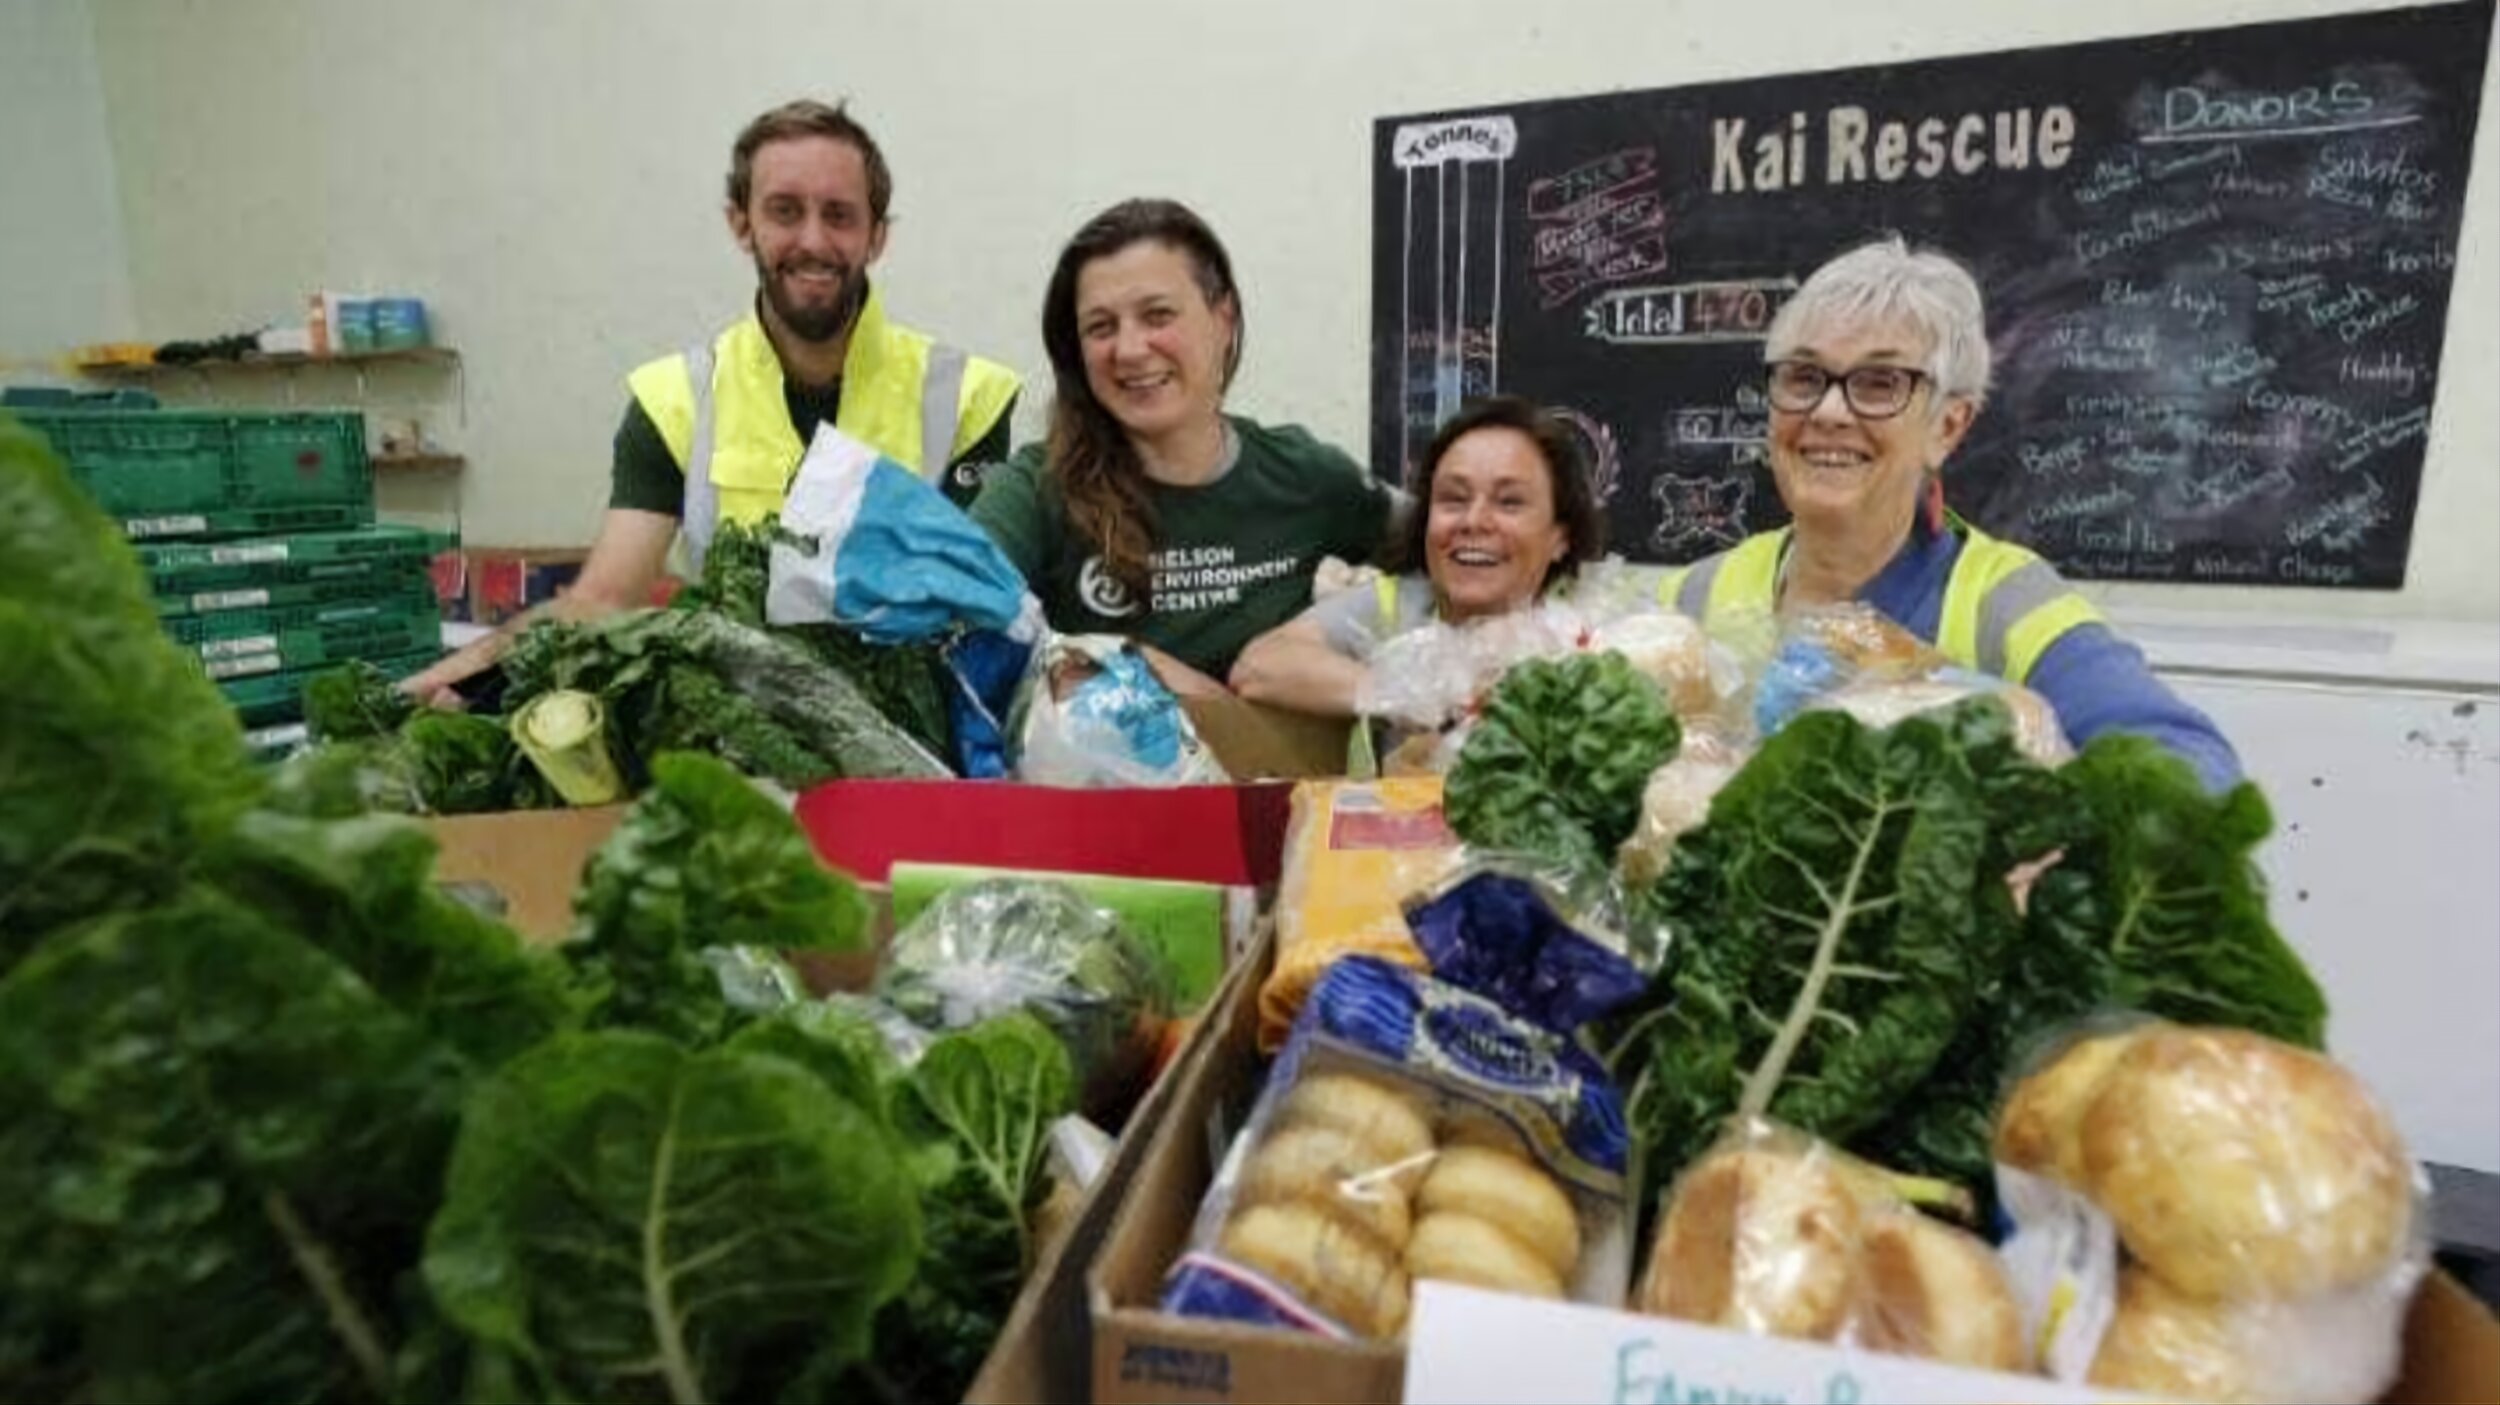 Families' demand for food relief at record levels in New Zealand [Stuff ~ 08 Feb 2023]